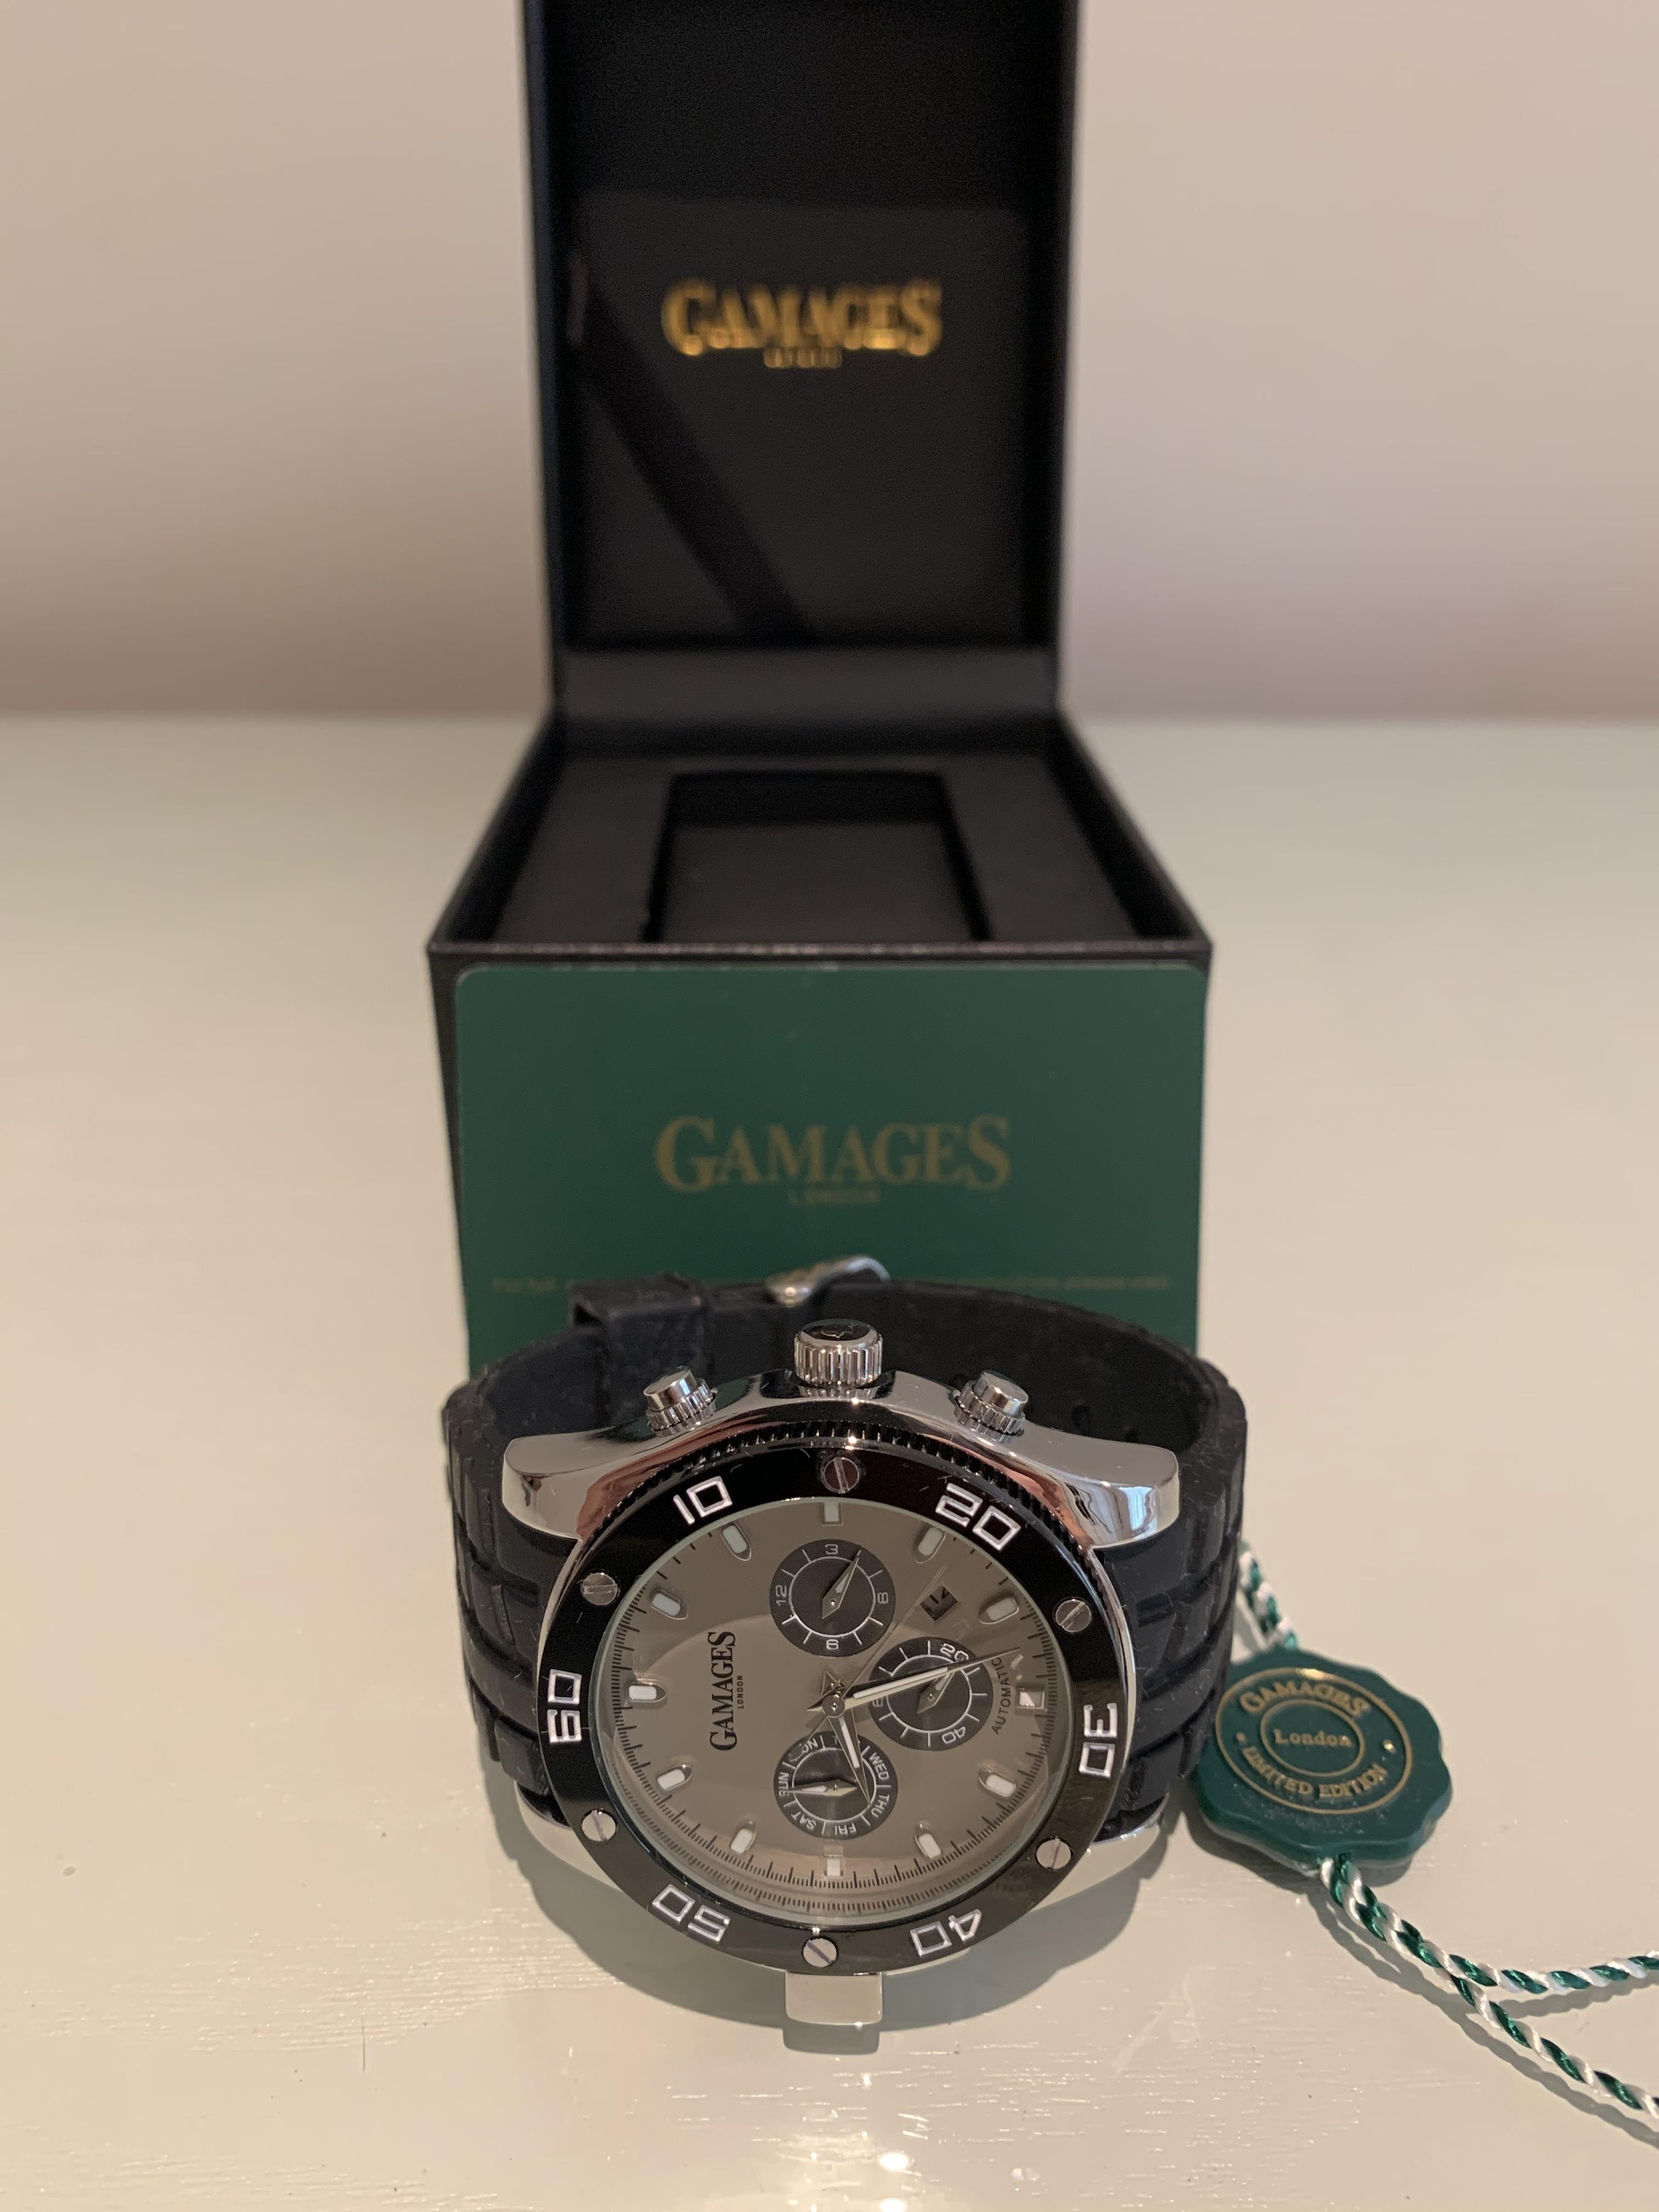 Limited Edition Hand Assembled Gamages Yacht Timer Automatic Steel – 5 Year Warranty & Free Delivery